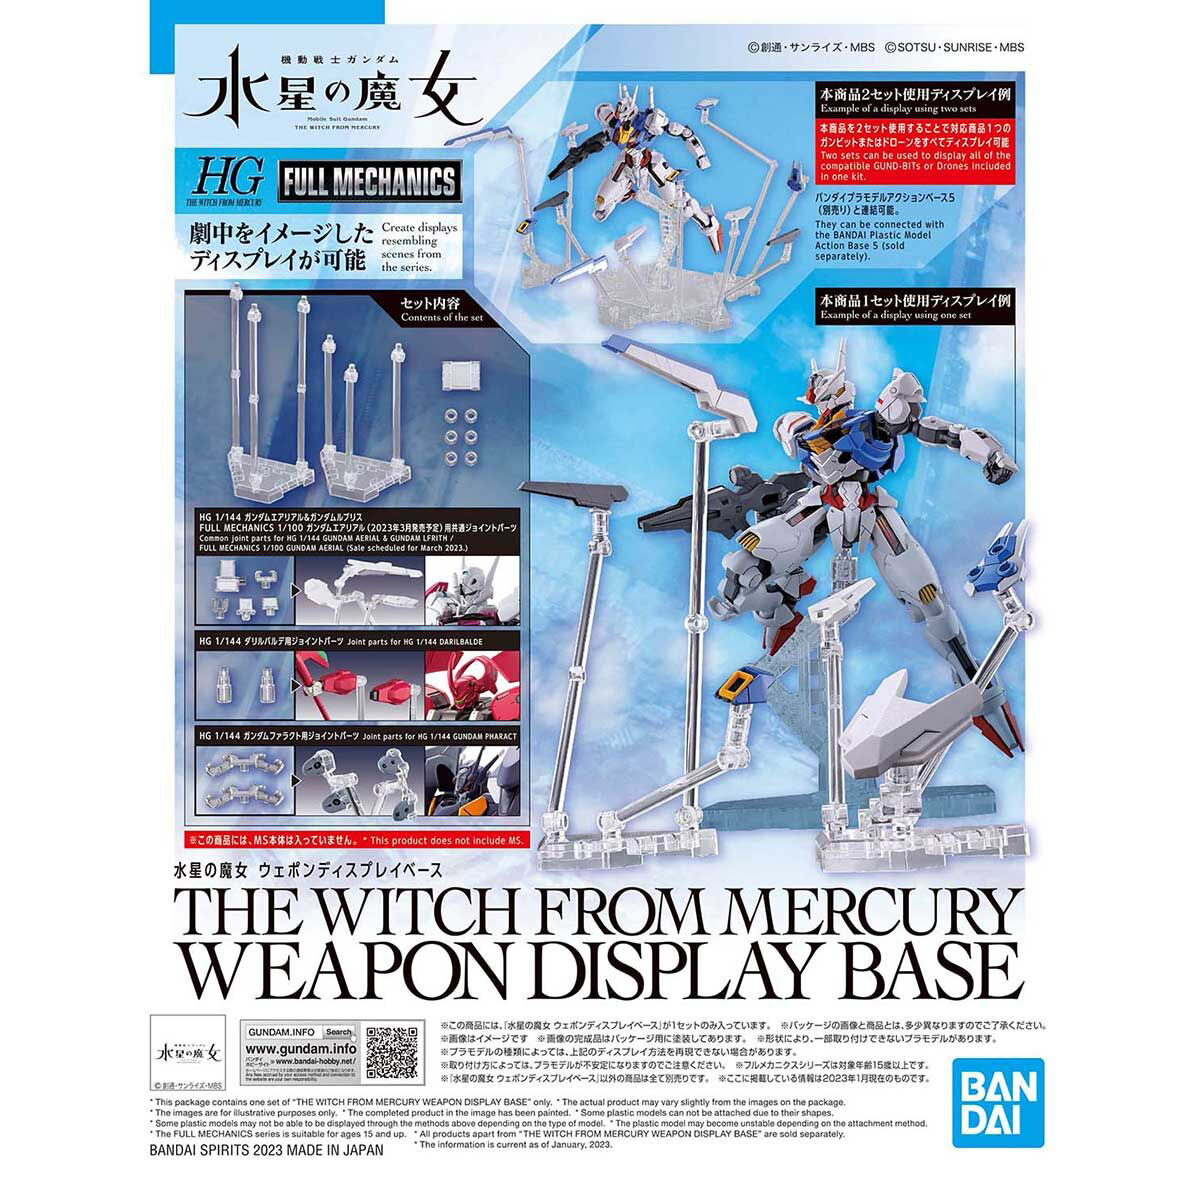 Bandai: The Witch from Mercury Weapon Display Base